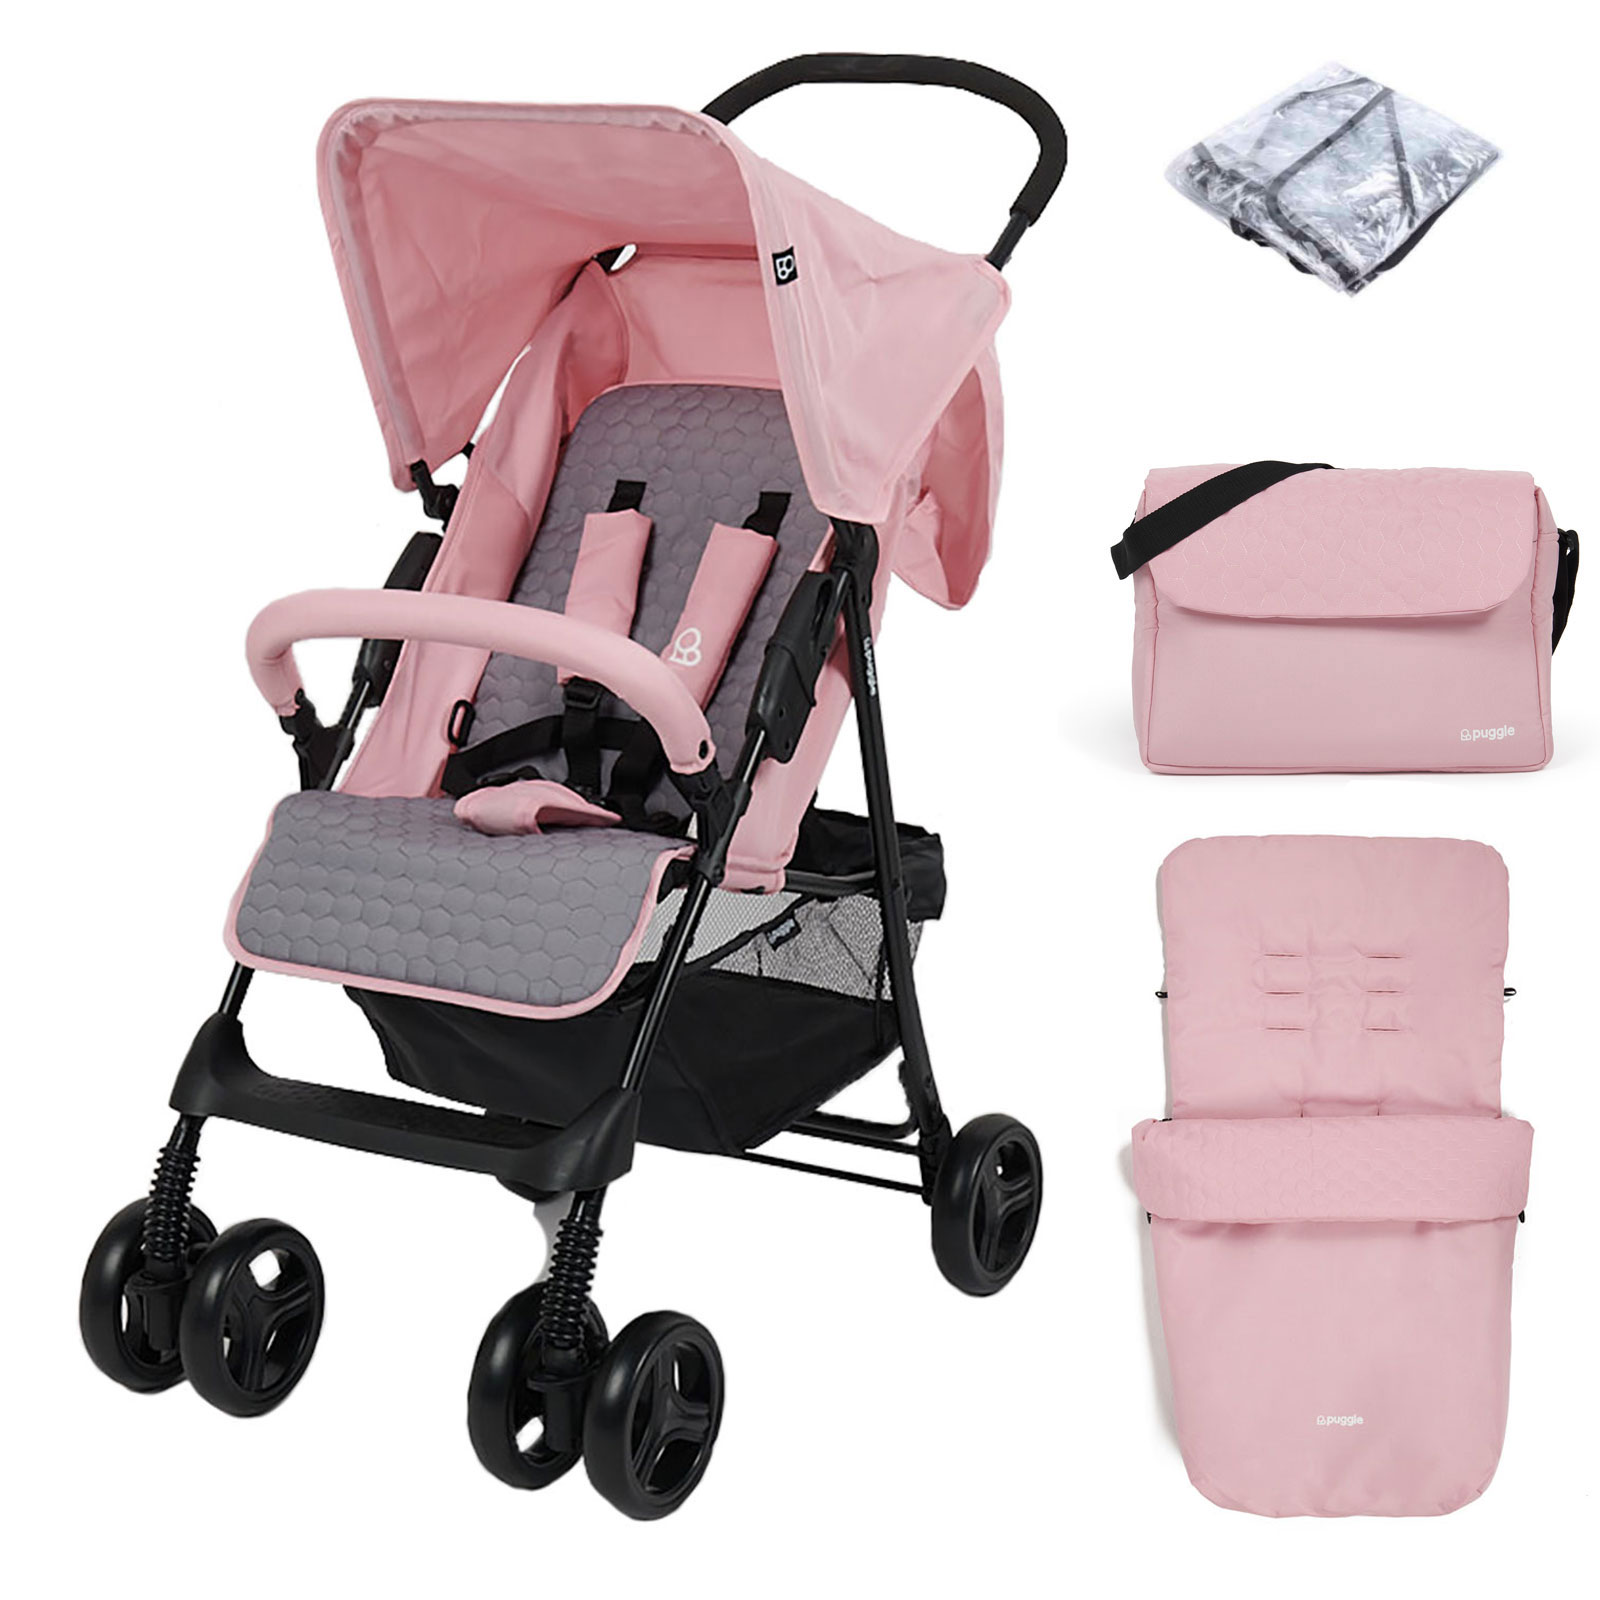 Puggle Holiday Luxe Pushchair Stroller with Raincover, Universal Footmuff, Changing Bag and Mat – Vintage Pink